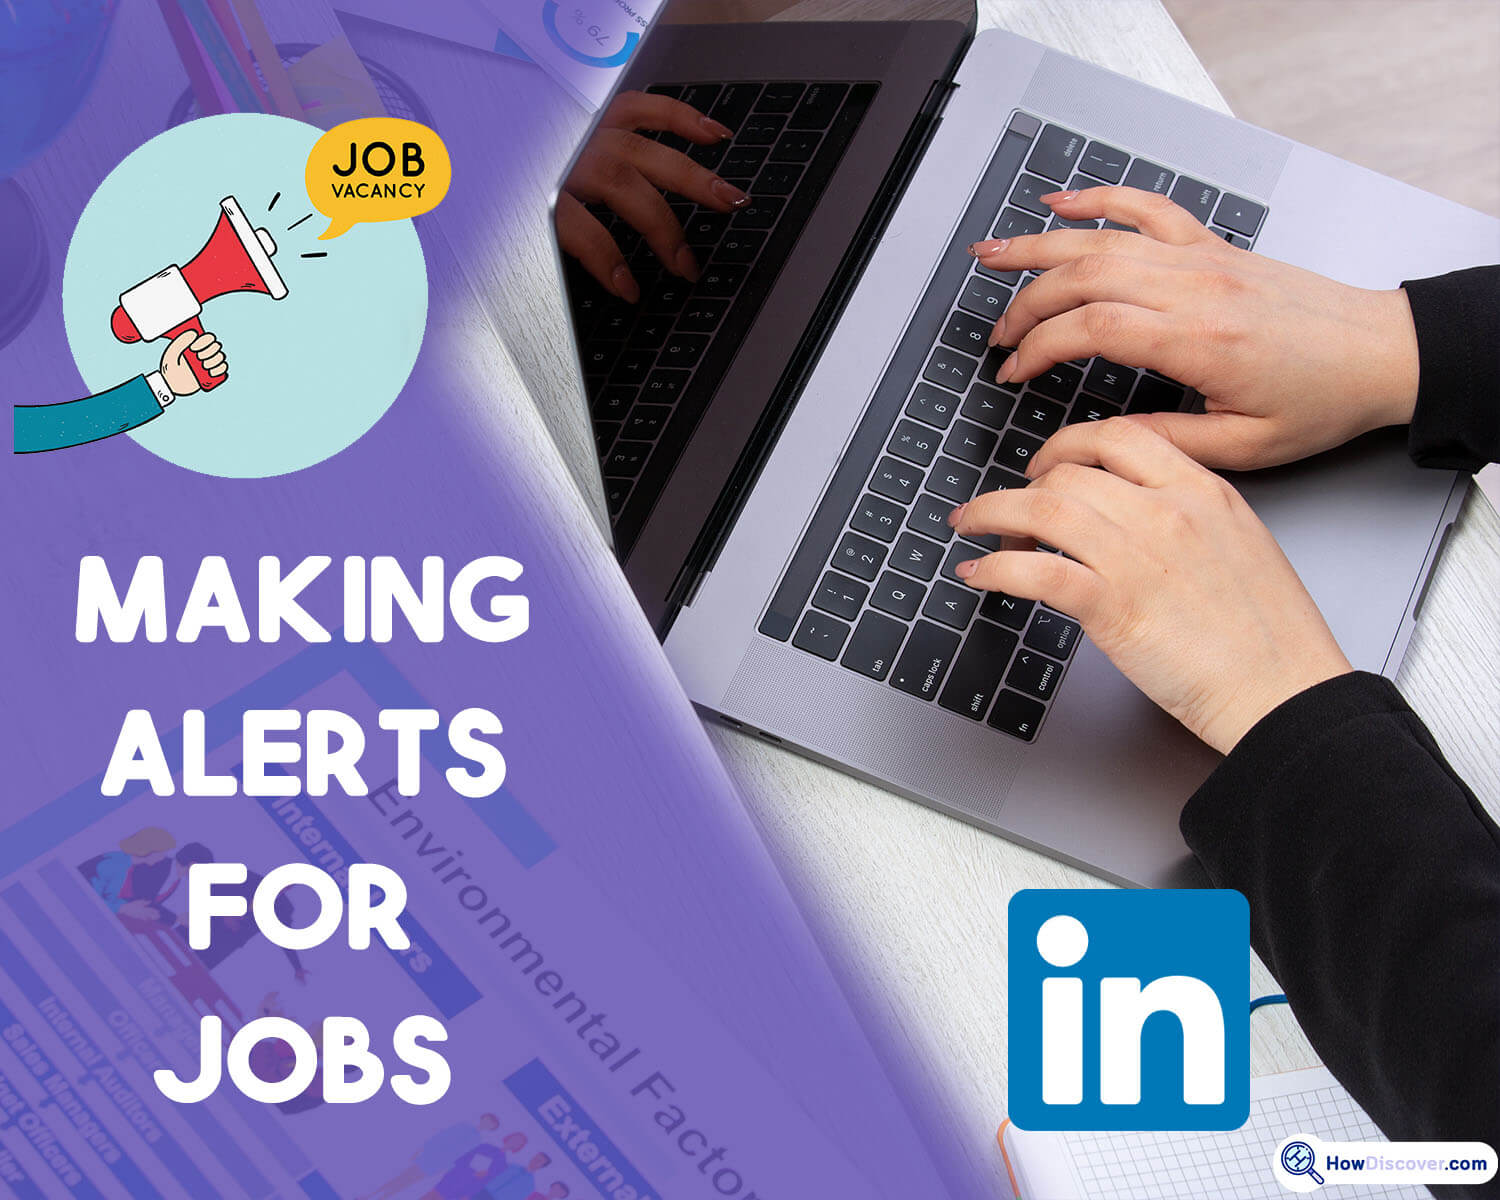 Making alerts for jobs based on searches for jobs - How To Set Up Job Alerts On LinkedIn